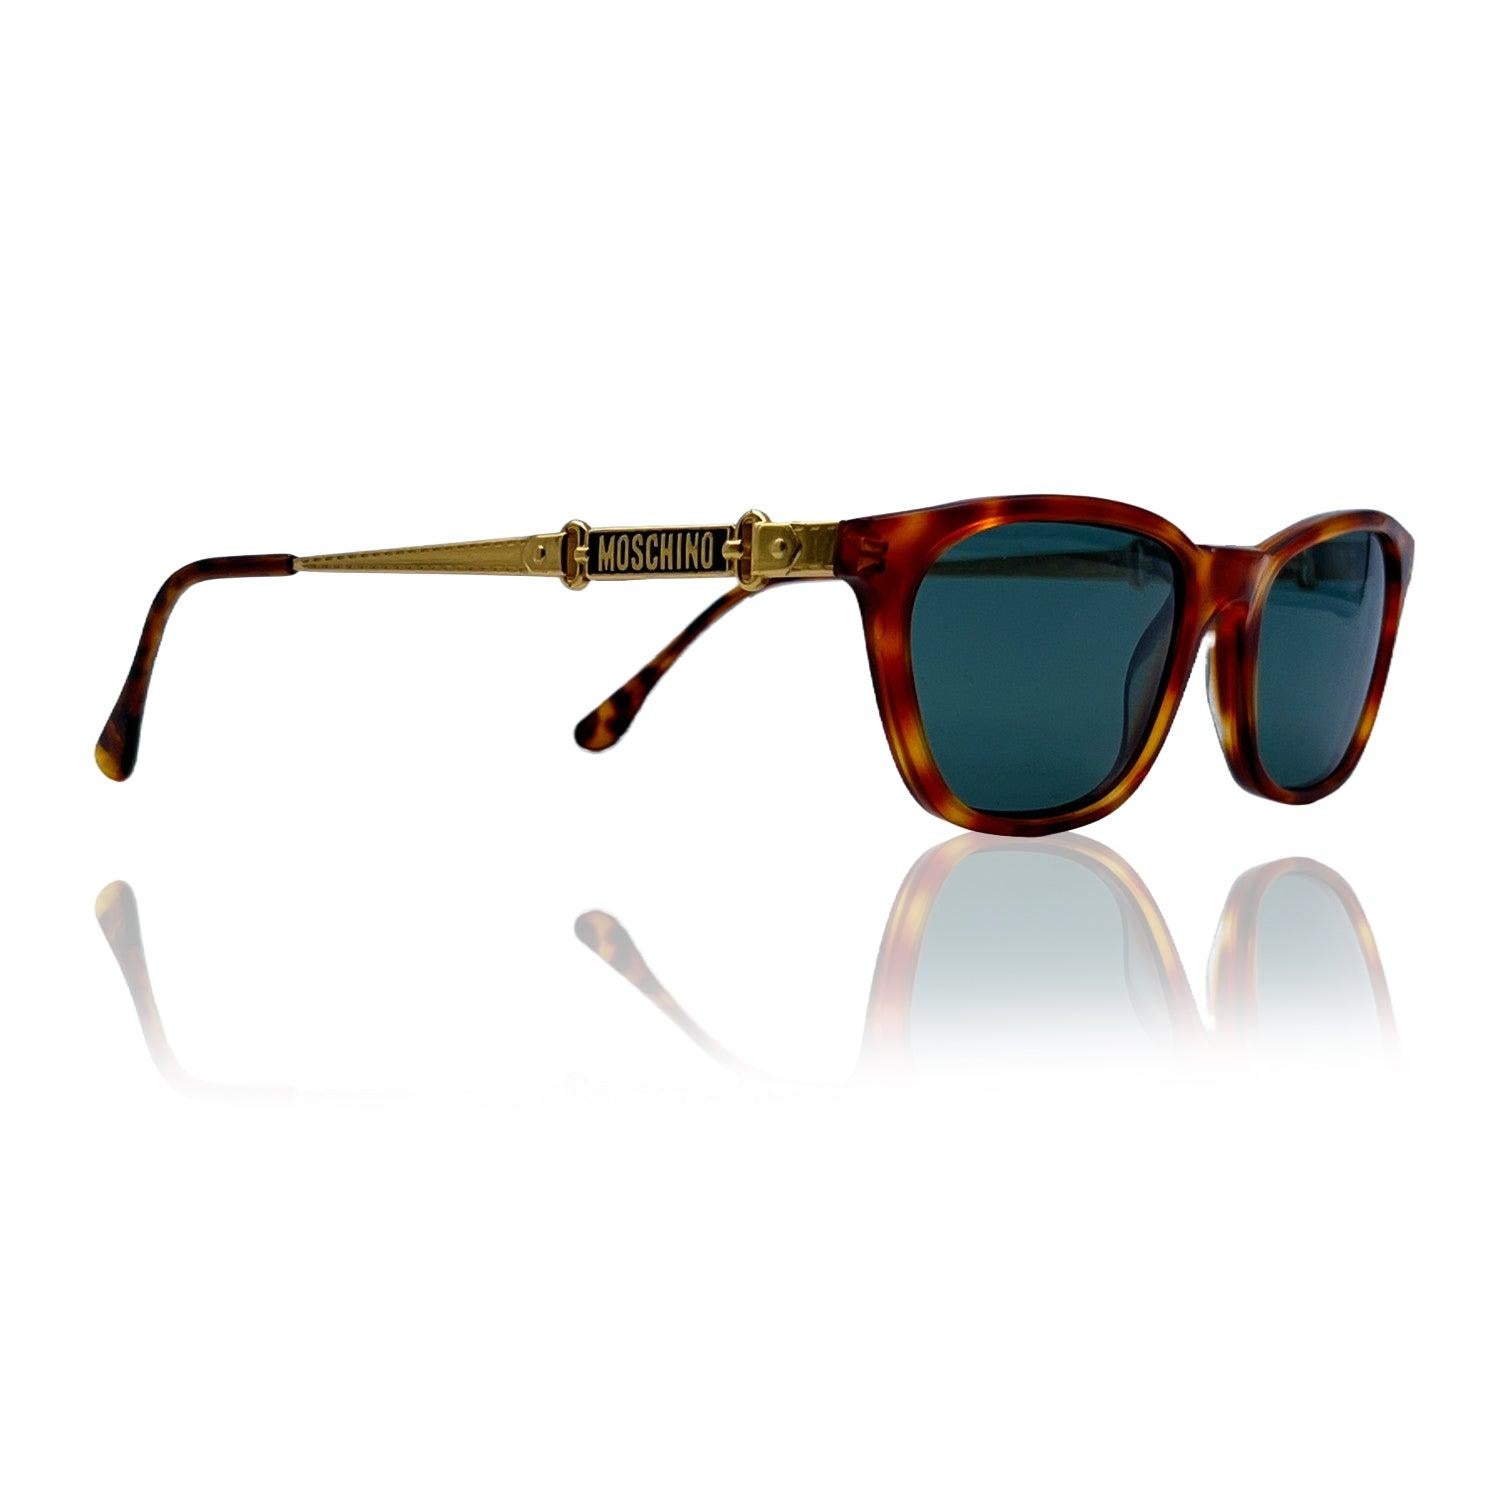 Moschino by Persol Vintage Brown Unisex Sunglasses Mod. M55 54/19 In Excellent Condition For Sale In Rome, Rome